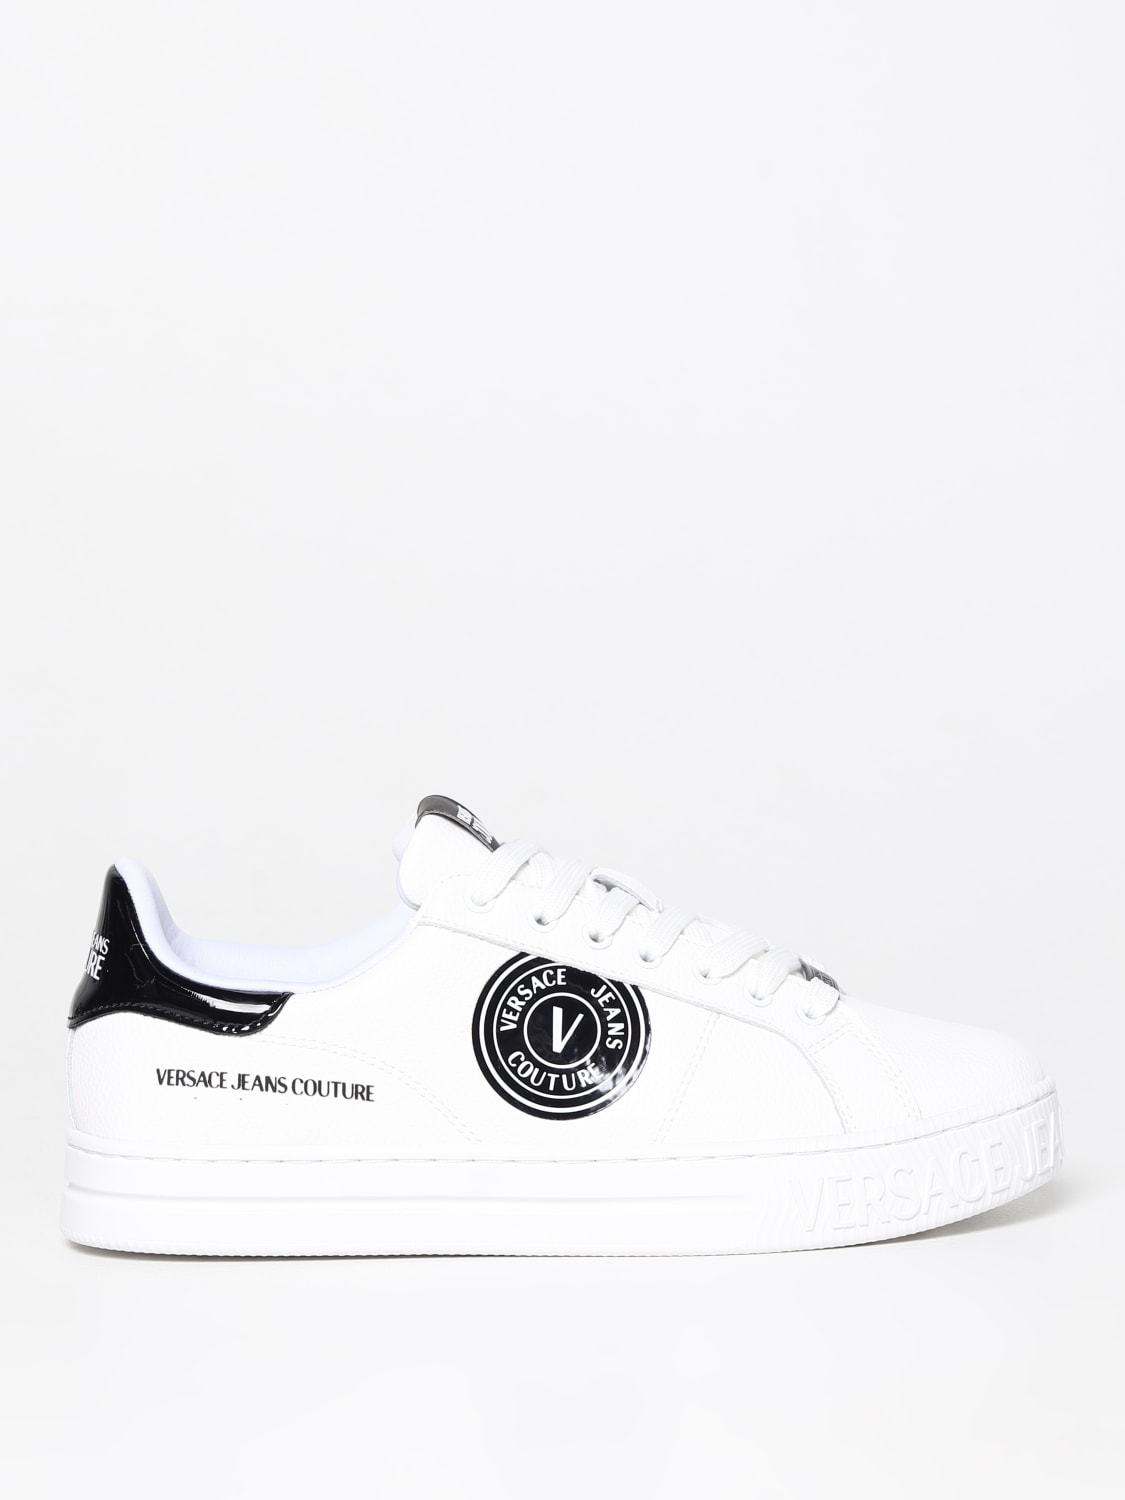 Philipp Plein Sneakers In Grained Leather in White for Men